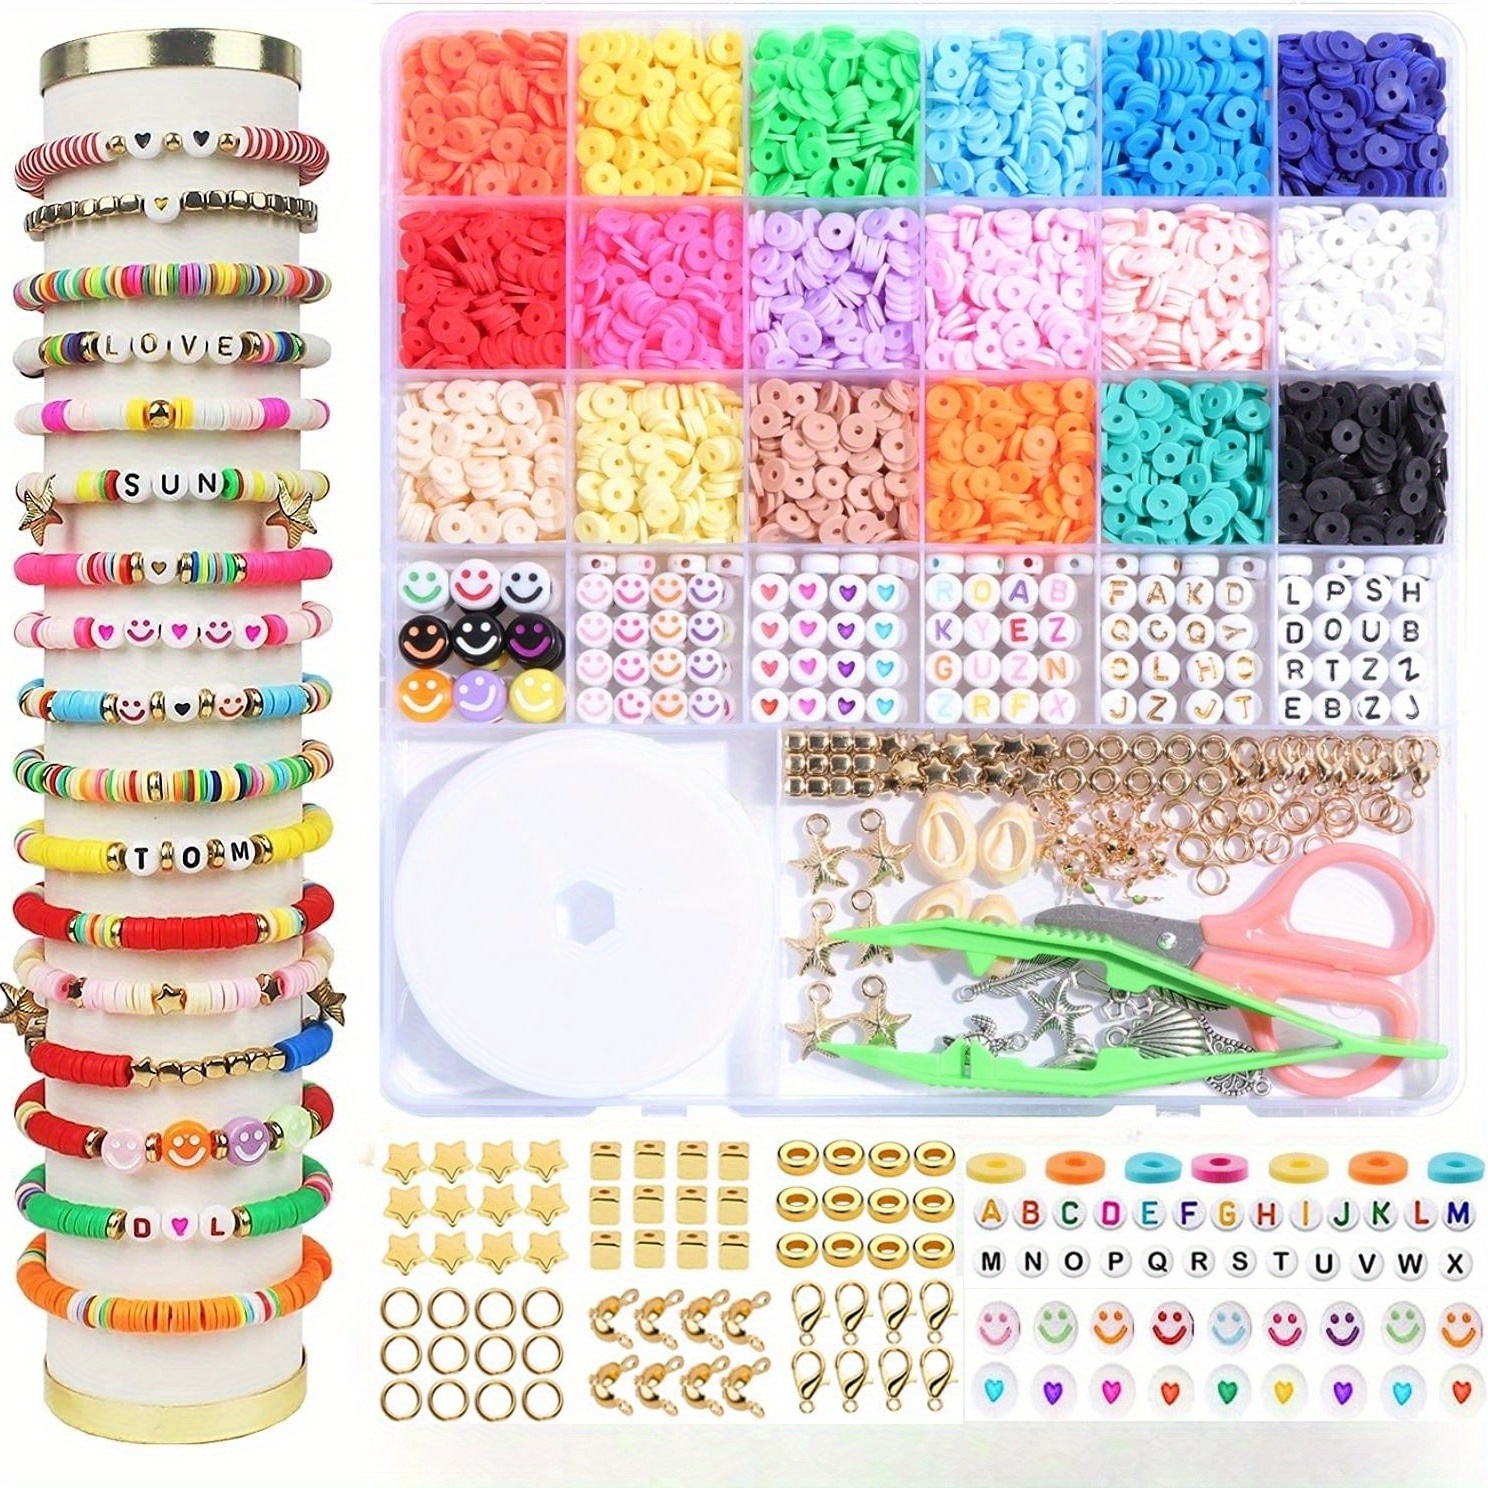 5100pcs Clay Bead Bracelet Making Kit, Preppy Spacer Flat Beads For Jewelry  Making, Polymer Black Stone Beads With Charms And Bungee Cord For Girls Gi